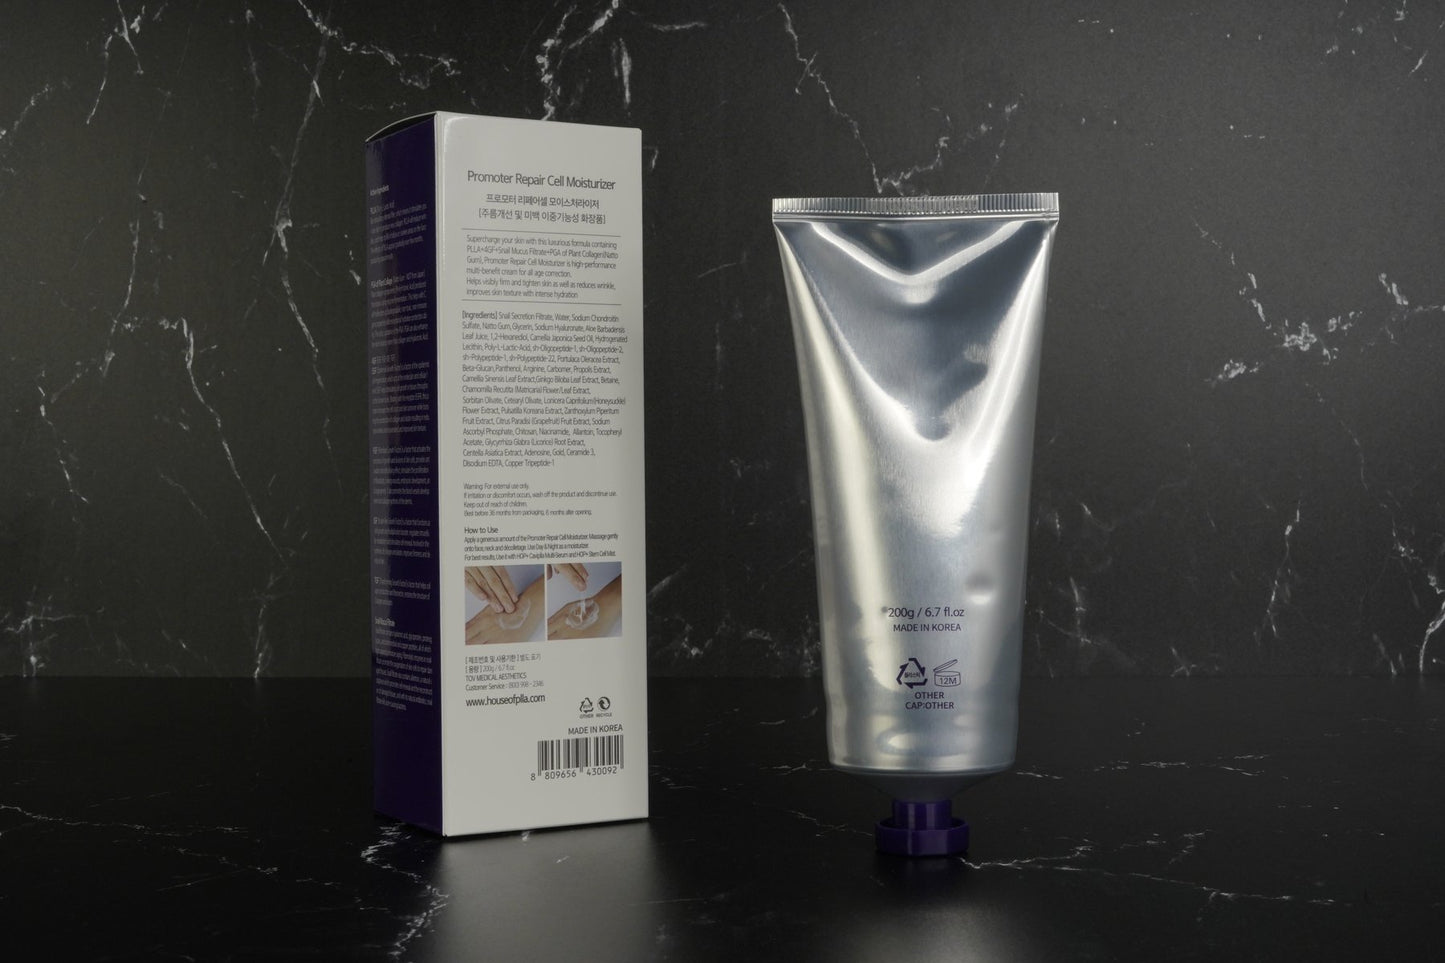 HOP+ Promoter Repair Cell Moisturizer (formerly Sculplla)